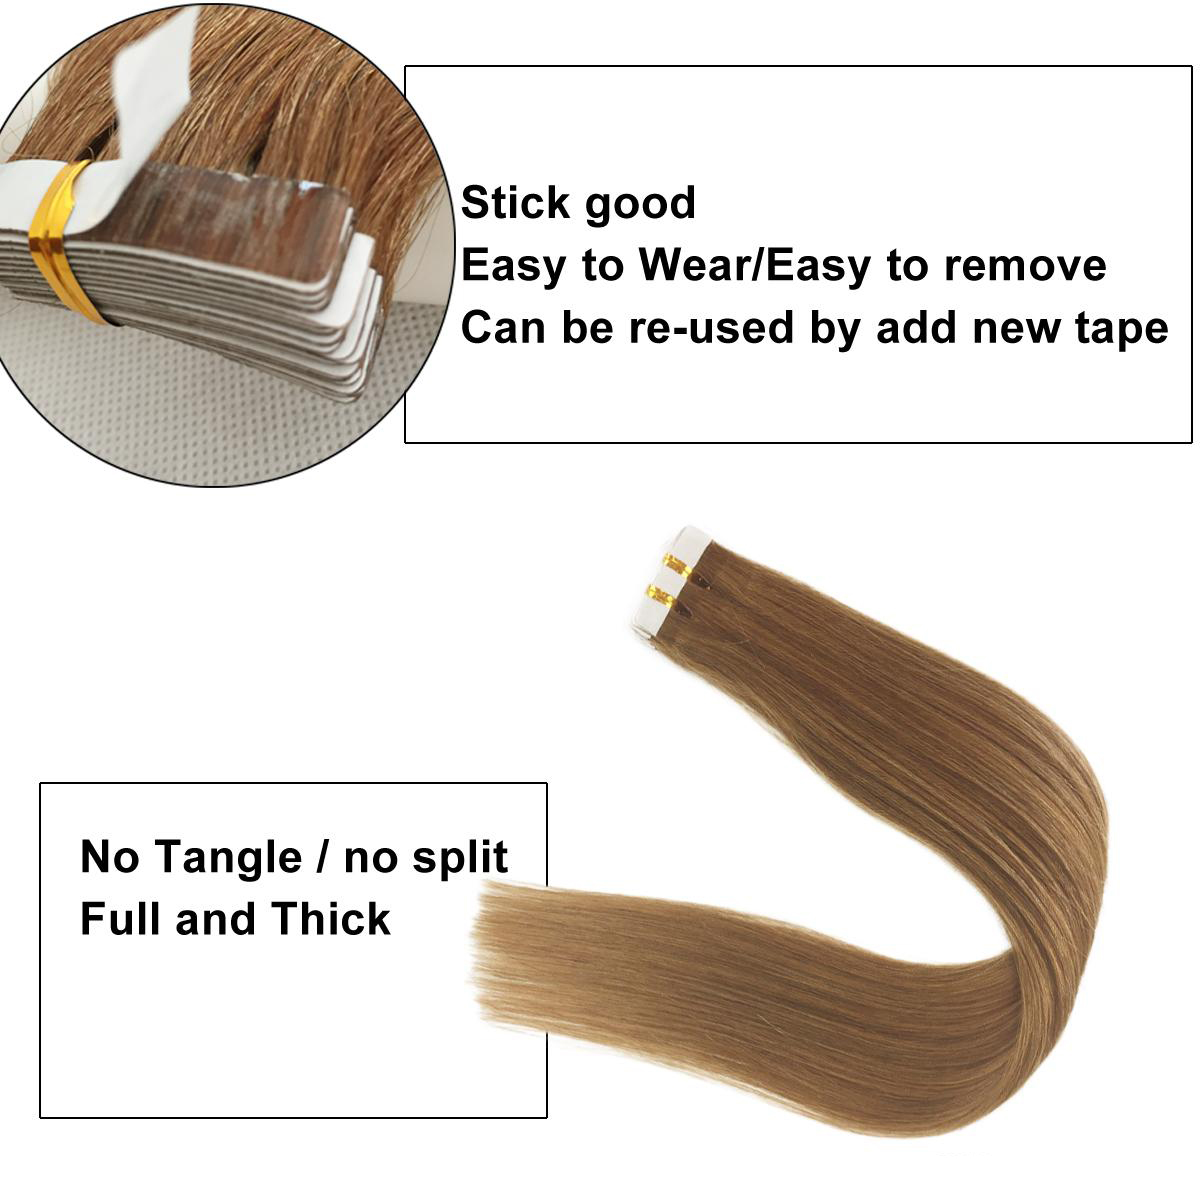 Quality Seamless Human Hair Extensions - Brazilian Remy Skin Hair Extensions Quality Seamless Human Hair Extensions - Brazilian Remy Skin Hair Extensions